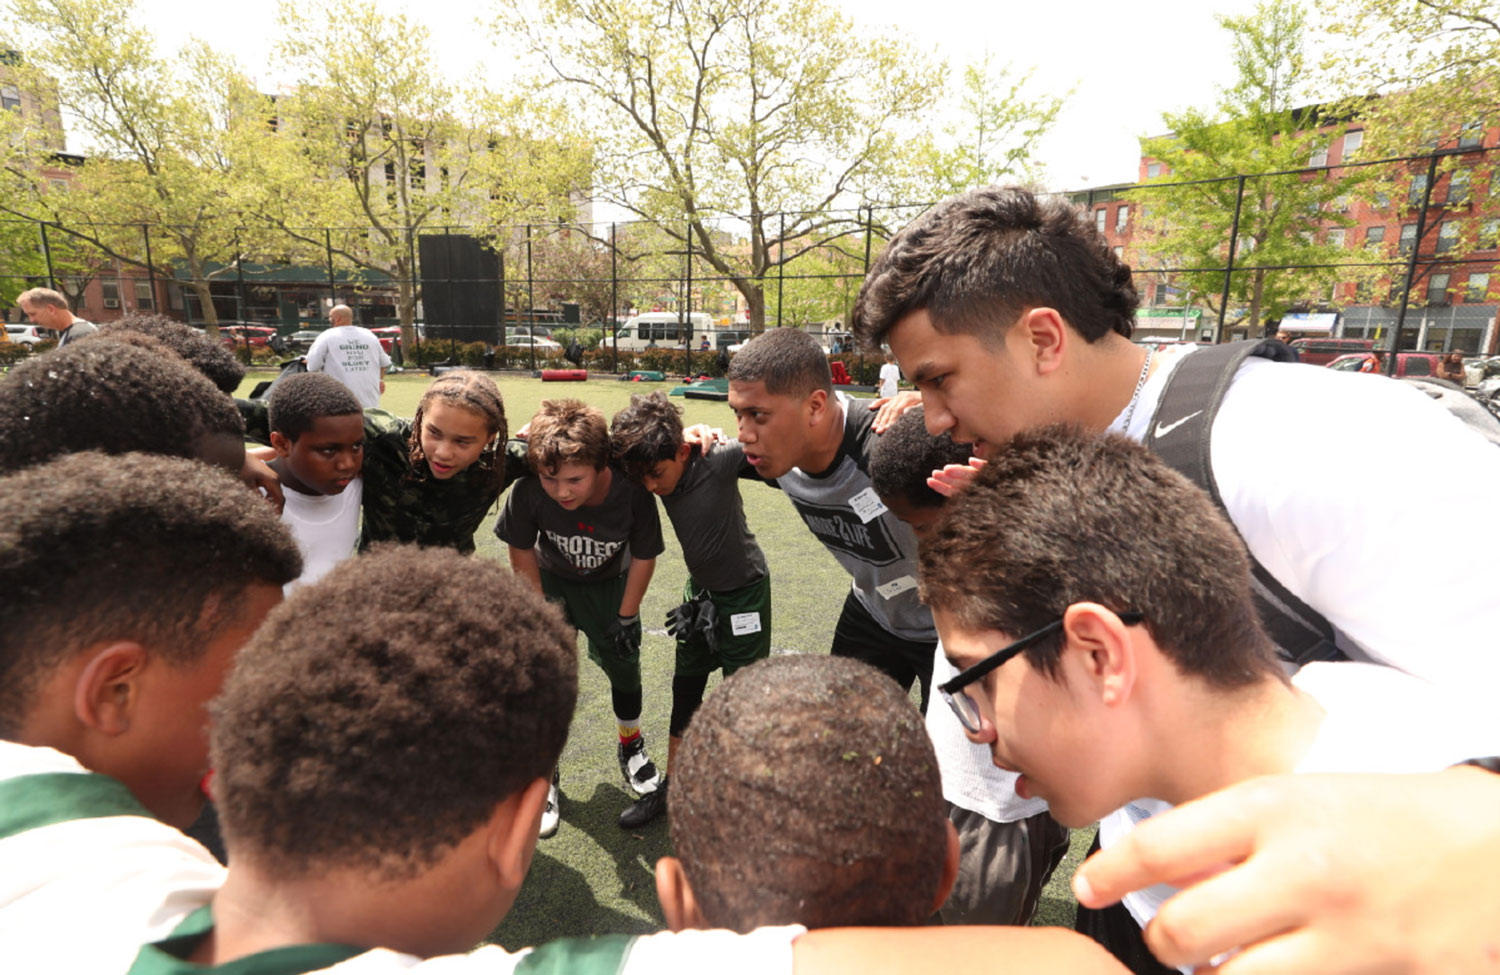 A BYU player leads a huddle with participants.